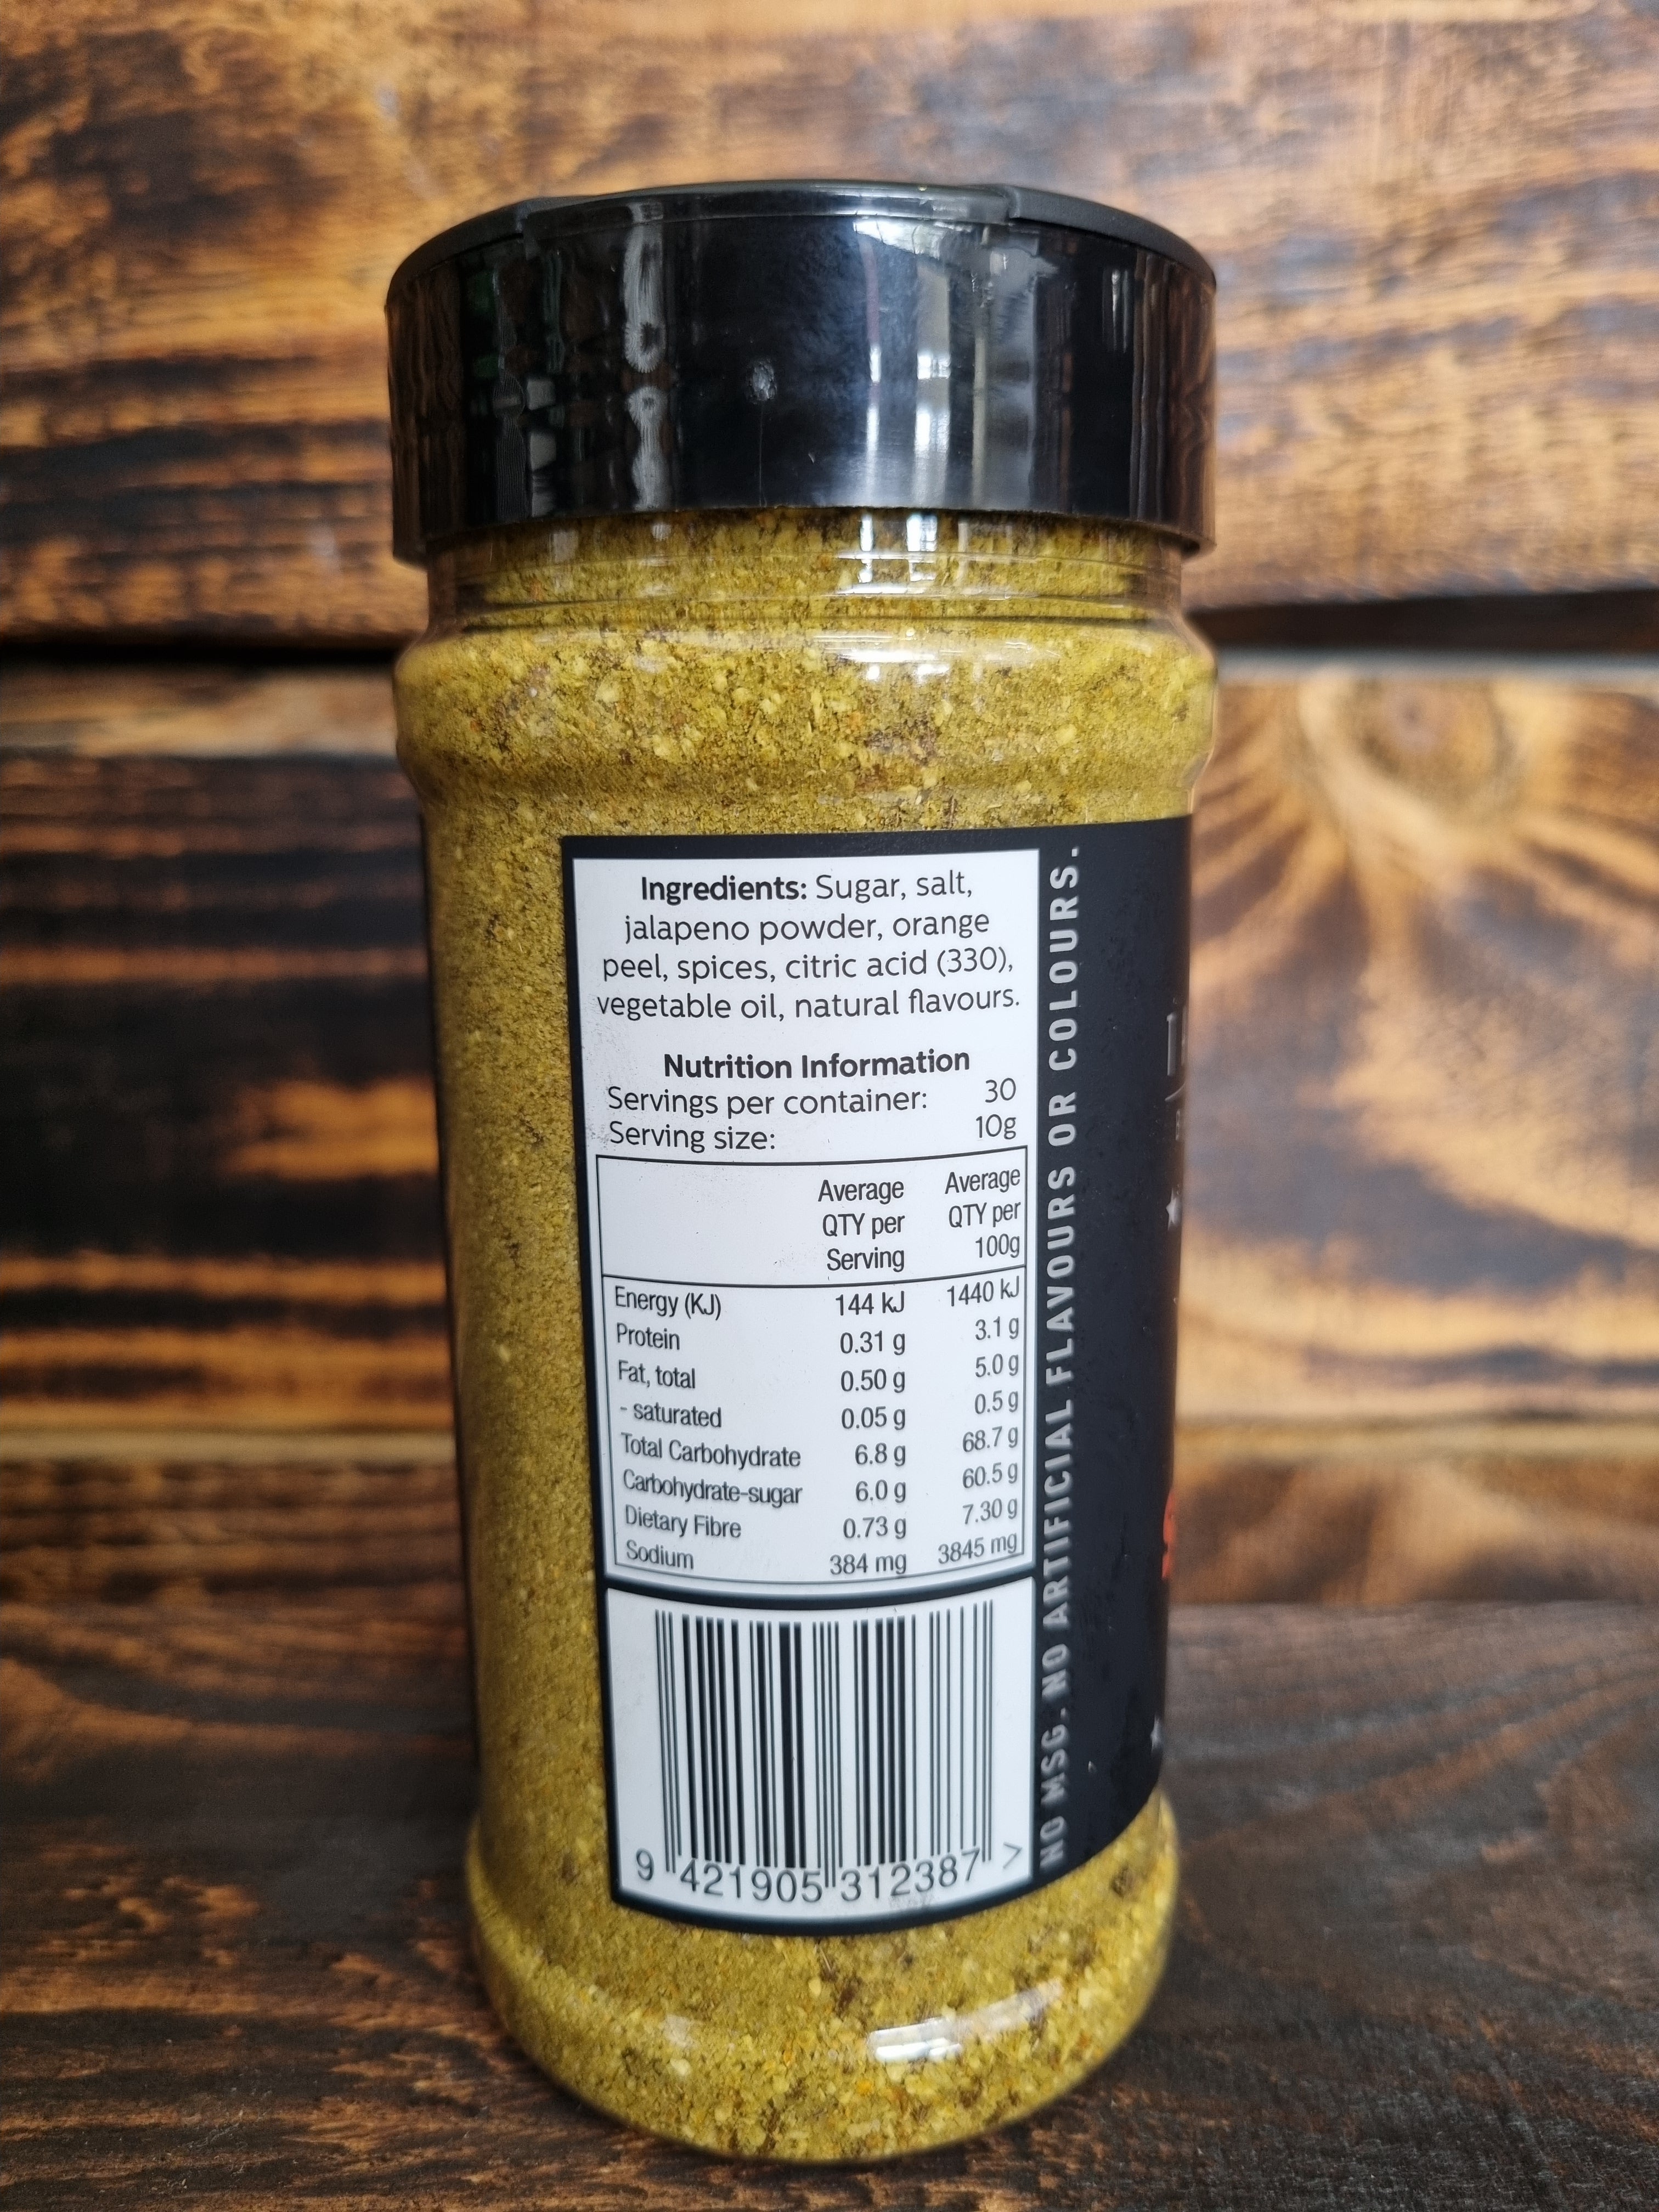 Jalapeno and Sweet Orange Rub by the Four Saucemen 300g